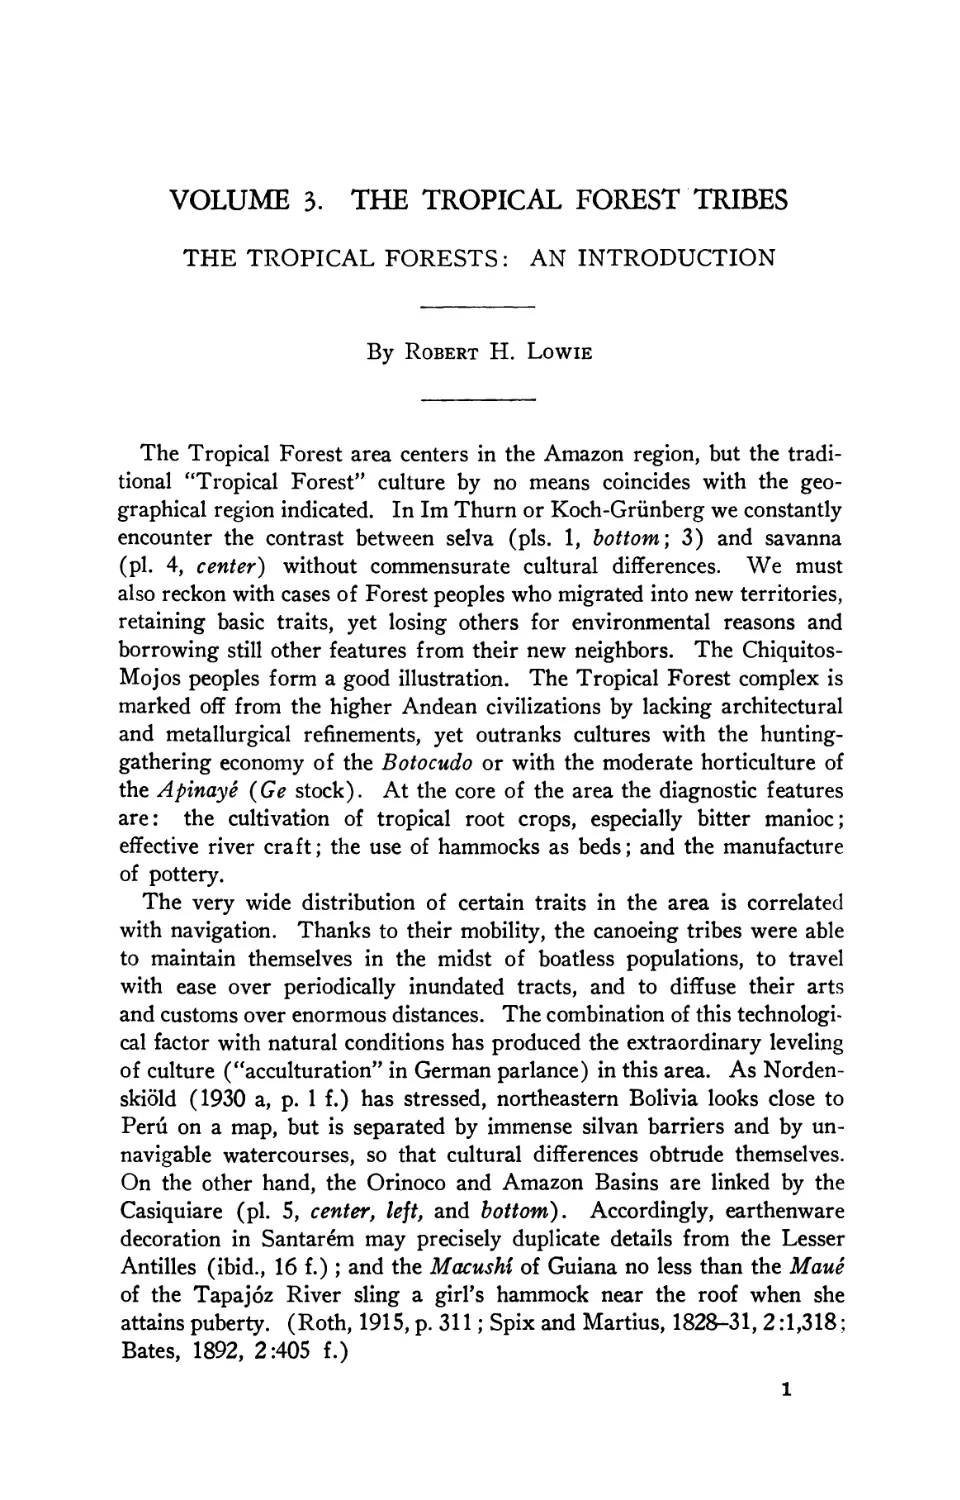 The Tropical Forests: An introduction, by Robert H. Lowie